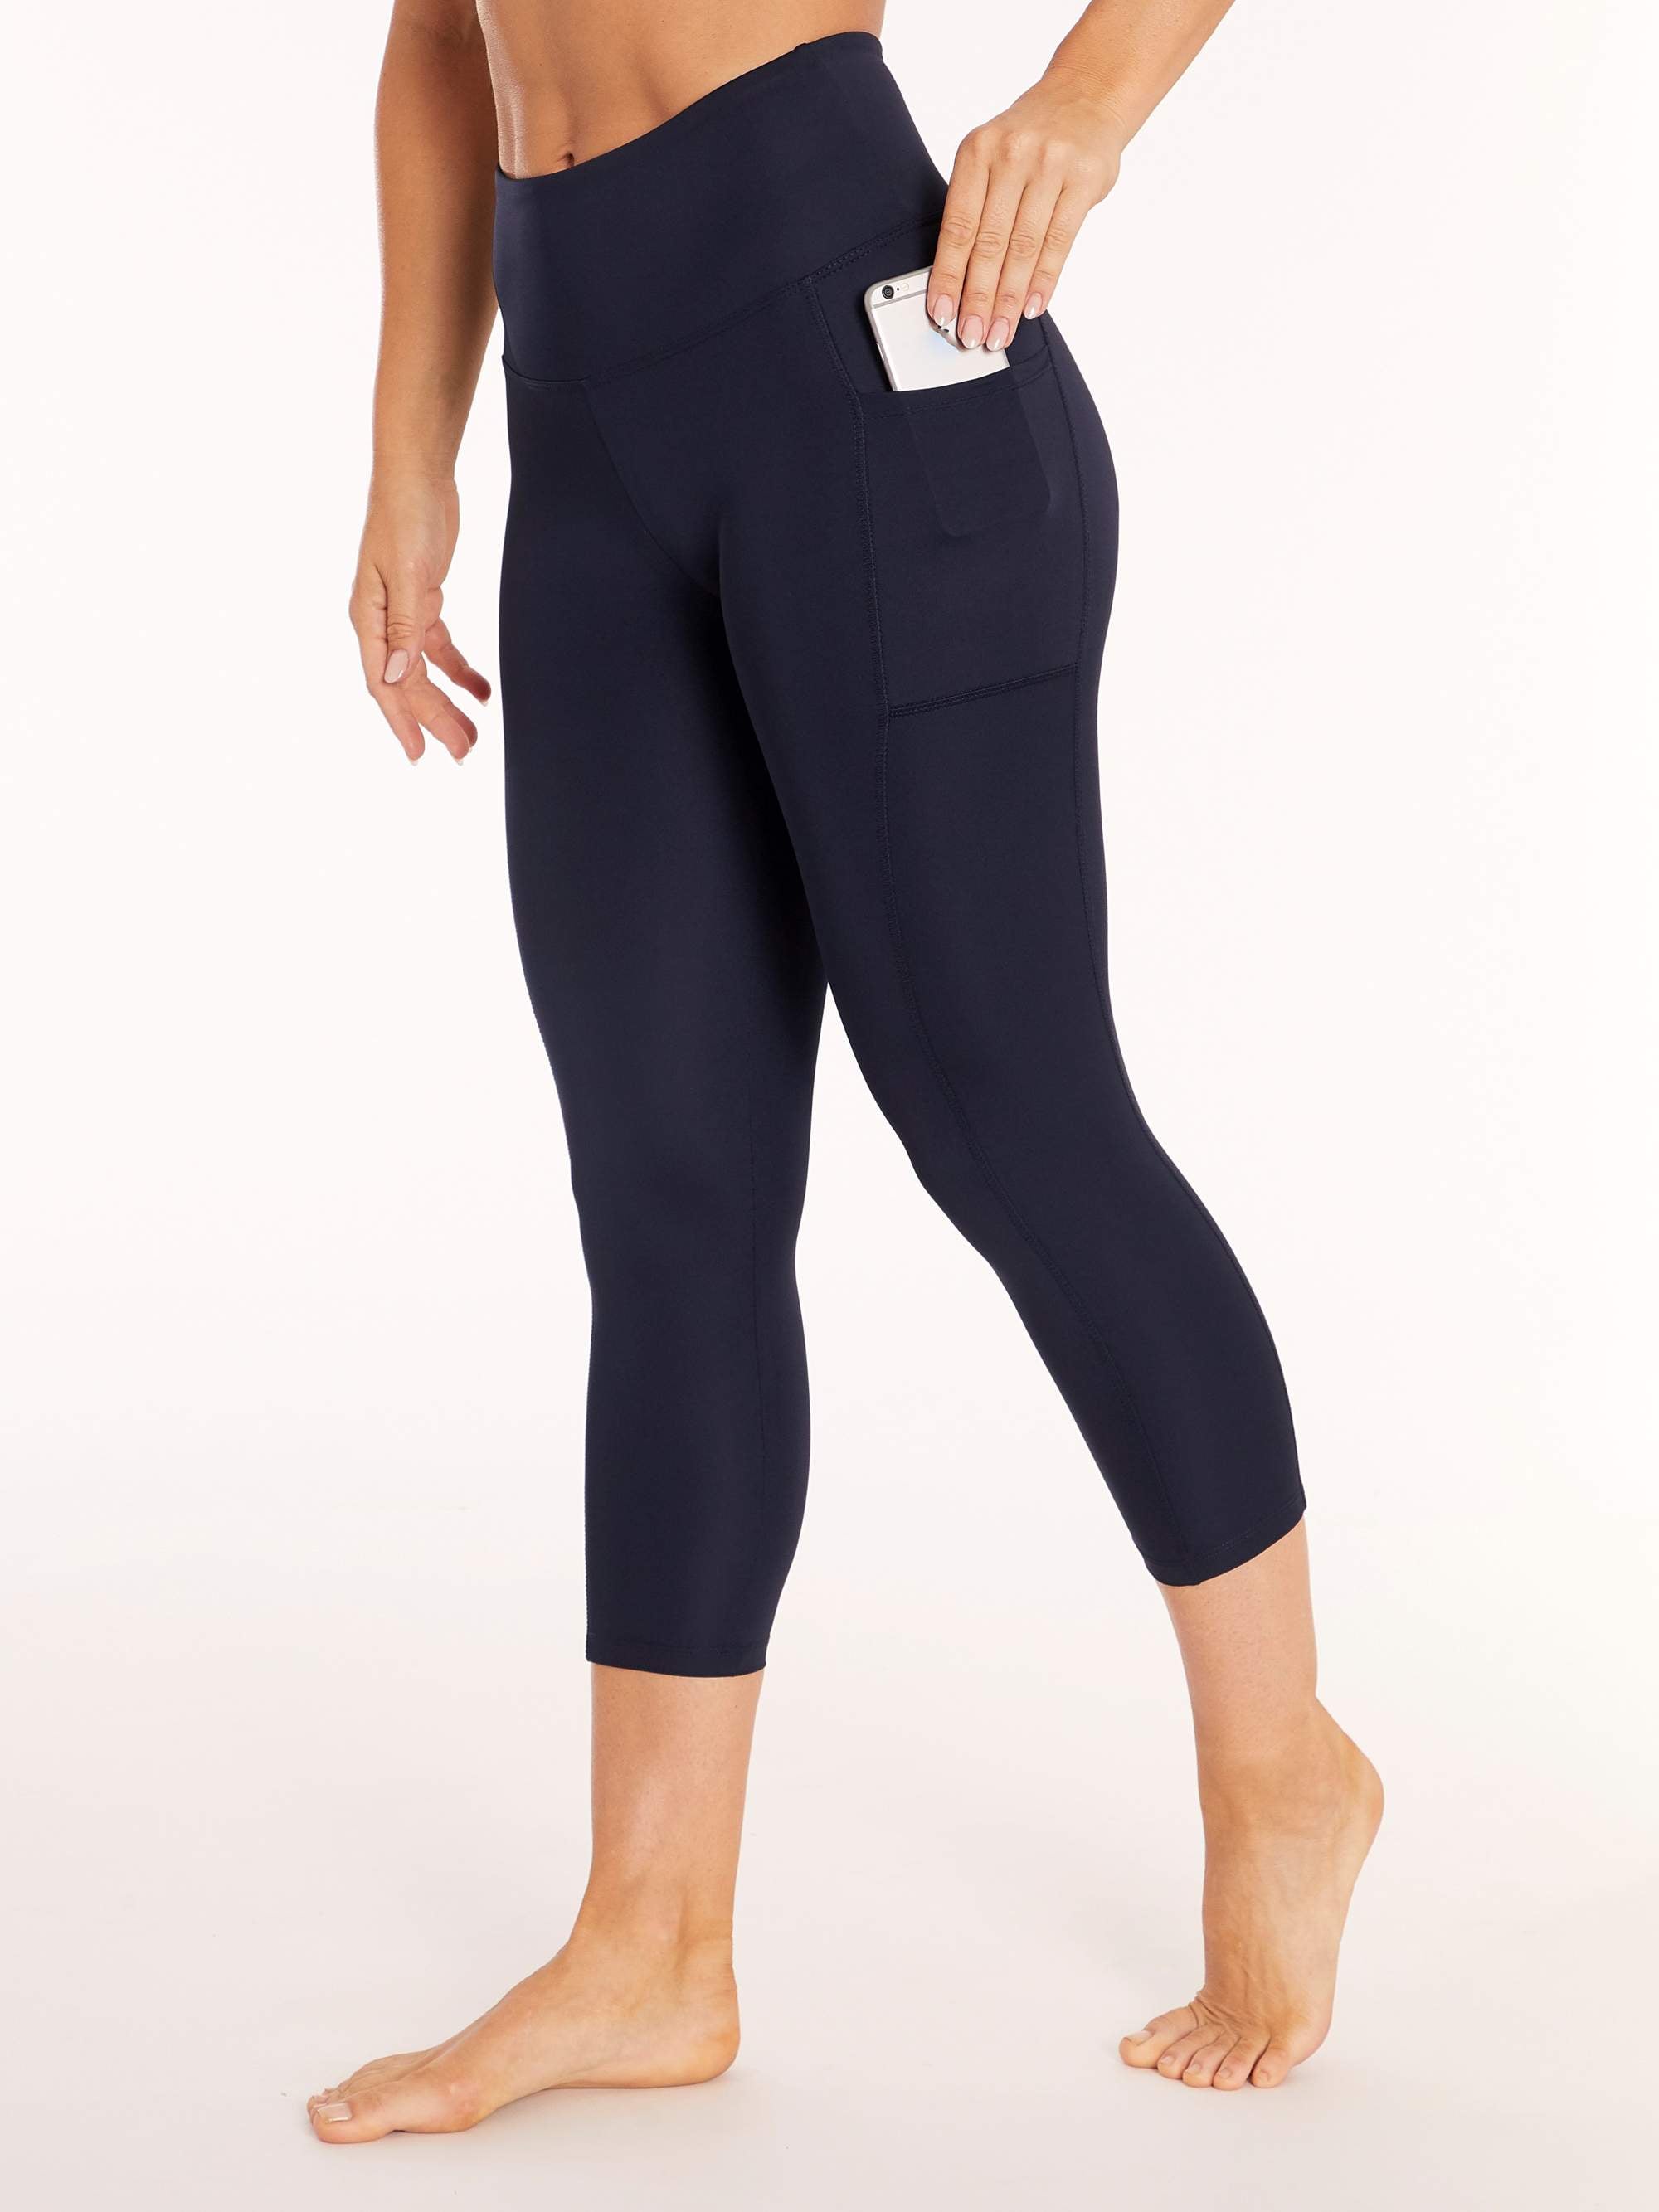 Bally Total Fitness Active Core High Rise Capri Leggings, Walmart's  Workout Clothes Are Next-Level Cute and Seriously Affordable